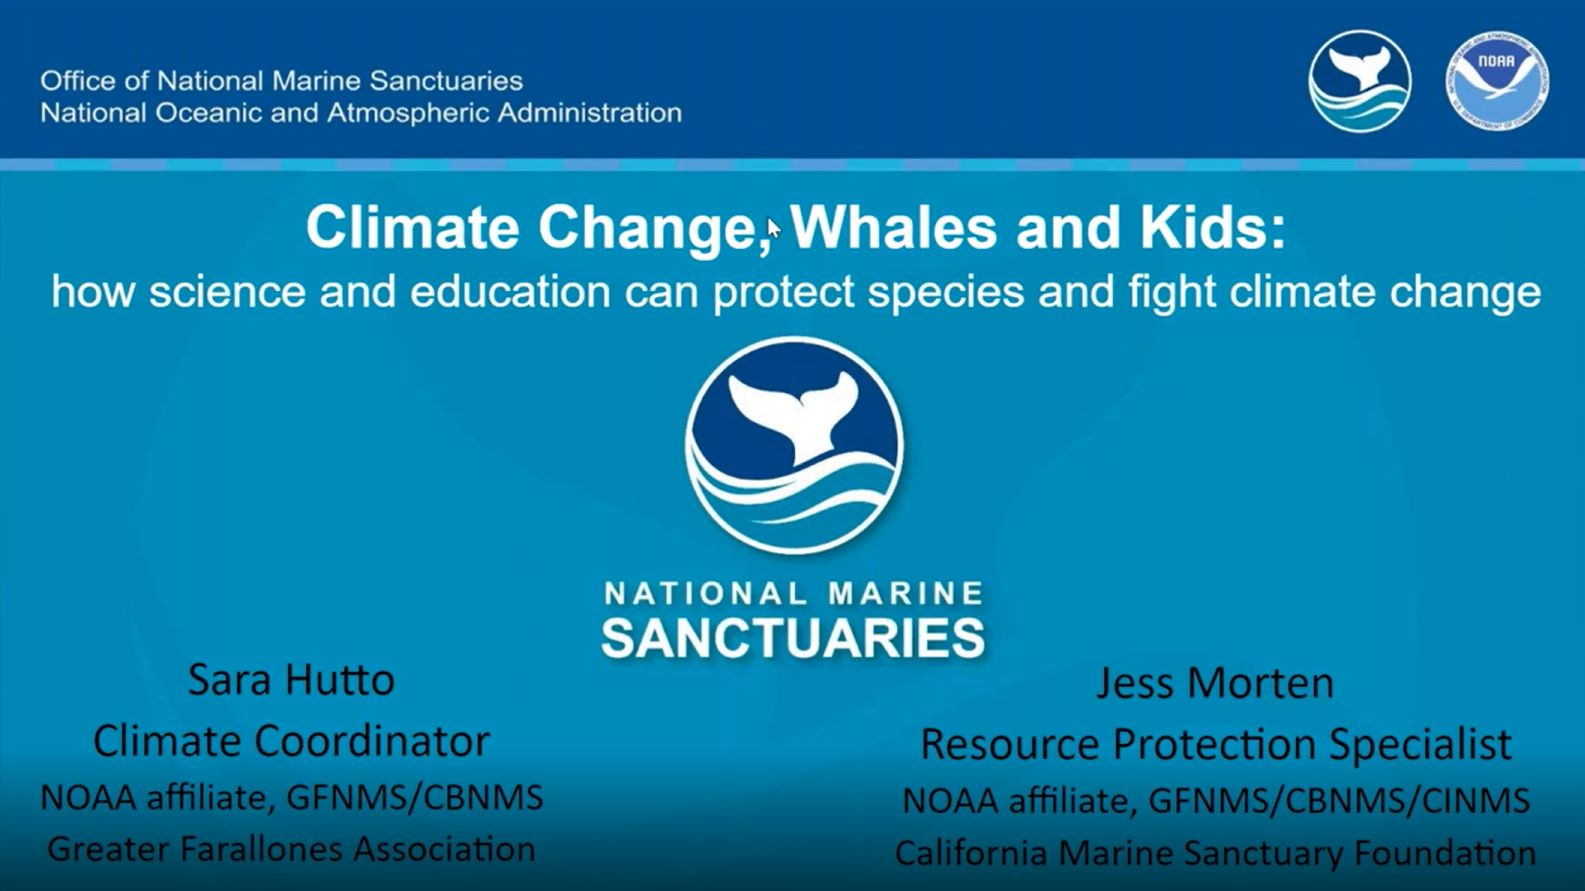 A teal presentation slide titled “Climate Change, Whales, and Kids: how science and education can protect species and fight climate change” in white, the Office of National Marine Sanctuaries logo is in the middle of the slide, and featured with the NOAA logo on a dark blue strip at the top of the slide.